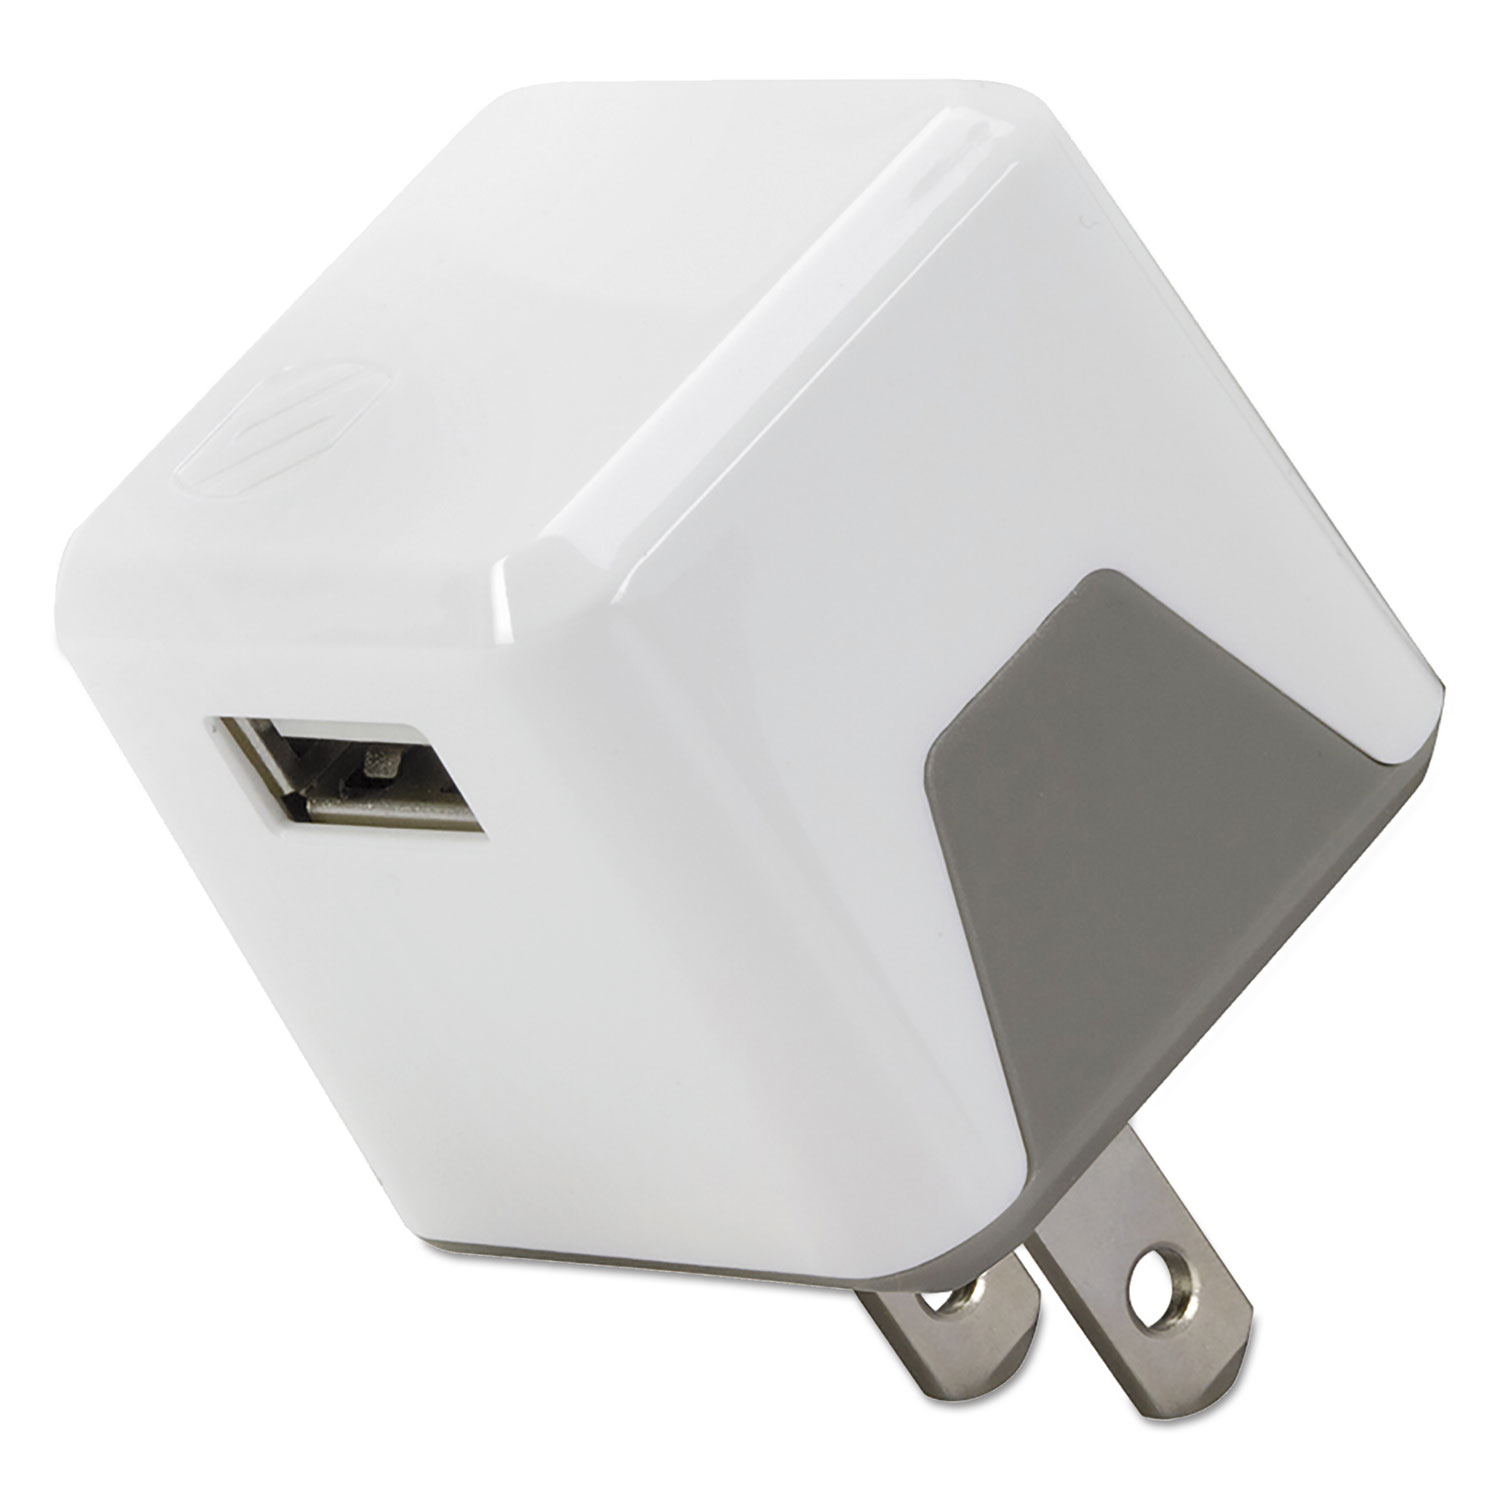  Scosche USBH121WT superCUBE Flip Wall Charger, USB, White (SOSUSBH121WT) 